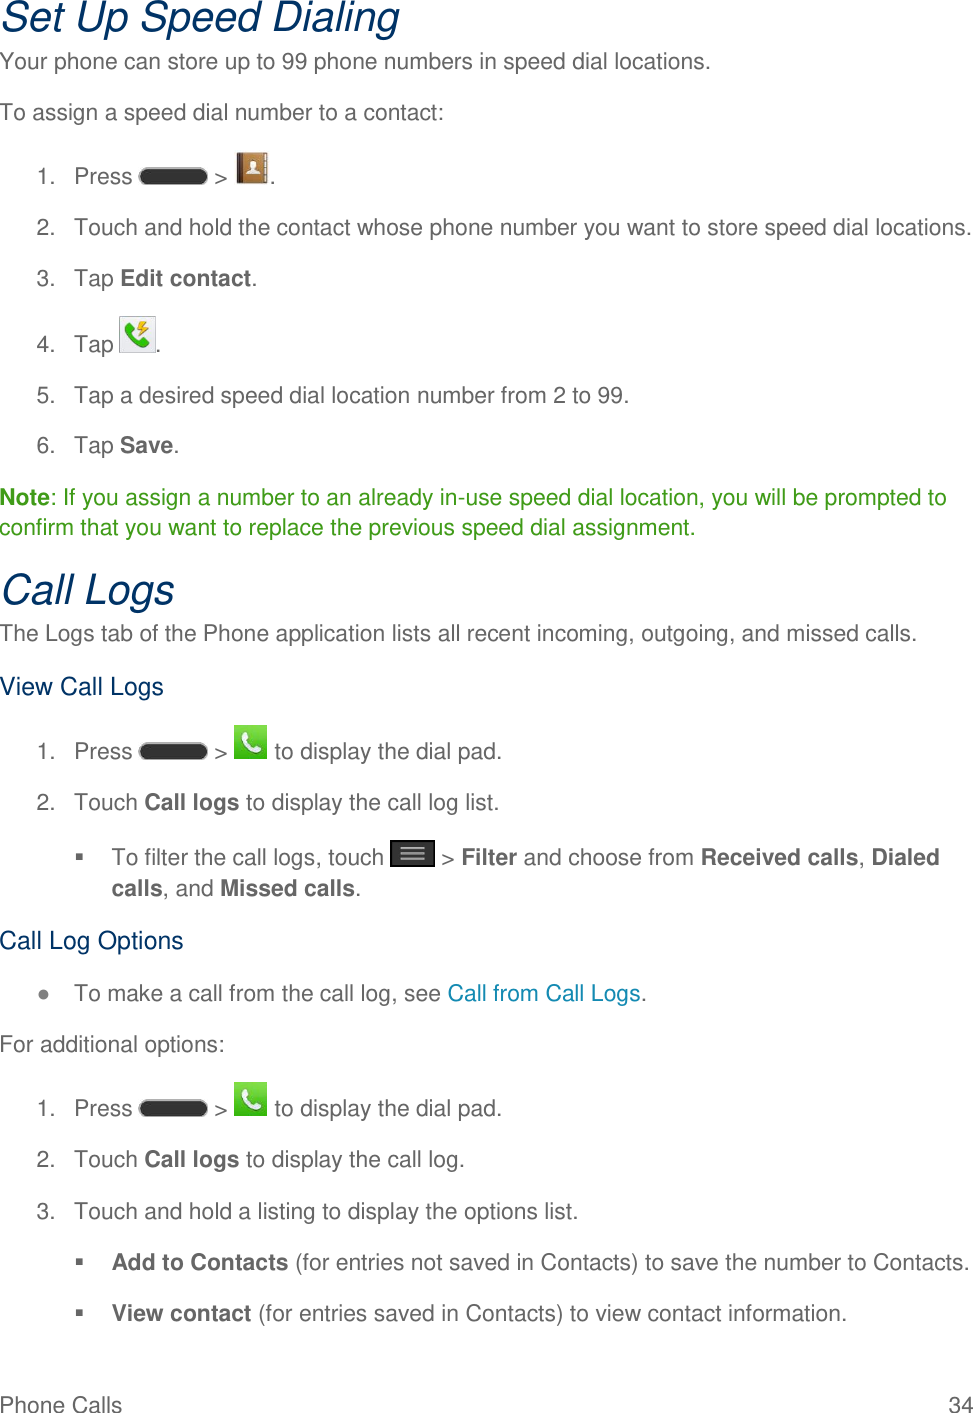 Phone Calls  34 Set Up Speed Dialing Your phone can store up to 99 phone numbers in speed dial locations. To assign a speed dial number to a contact: 1.  Press   &gt;  . 2.  Touch and hold the contact whose phone number you want to store speed dial locations. 3.  Tap Edit contact. 4.  Tap  . 5.  Tap a desired speed dial location number from 2 to 99. 6.  Tap Save. Note: If you assign a number to an already in-use speed dial location, you will be prompted to confirm that you want to replace the previous speed dial assignment. Call Logs The Logs tab of the Phone application lists all recent incoming, outgoing, and missed calls. View Call Logs 1.  Press   &gt;   to display the dial pad. 2.  Touch Call logs to display the call log list.   To filter the call logs, touch   &gt; Filter and choose from Received calls, Dialed calls, and Missed calls. Call Log Options ● To make a call from the call log, see Call from Call Logs. For additional options: 1.  Press   &gt;   to display the dial pad. 2.  Touch Call logs to display the call log. 3.  Touch and hold a listing to display the options list.  Add to Contacts (for entries not saved in Contacts) to save the number to Contacts.   View contact (for entries saved in Contacts) to view contact information.  